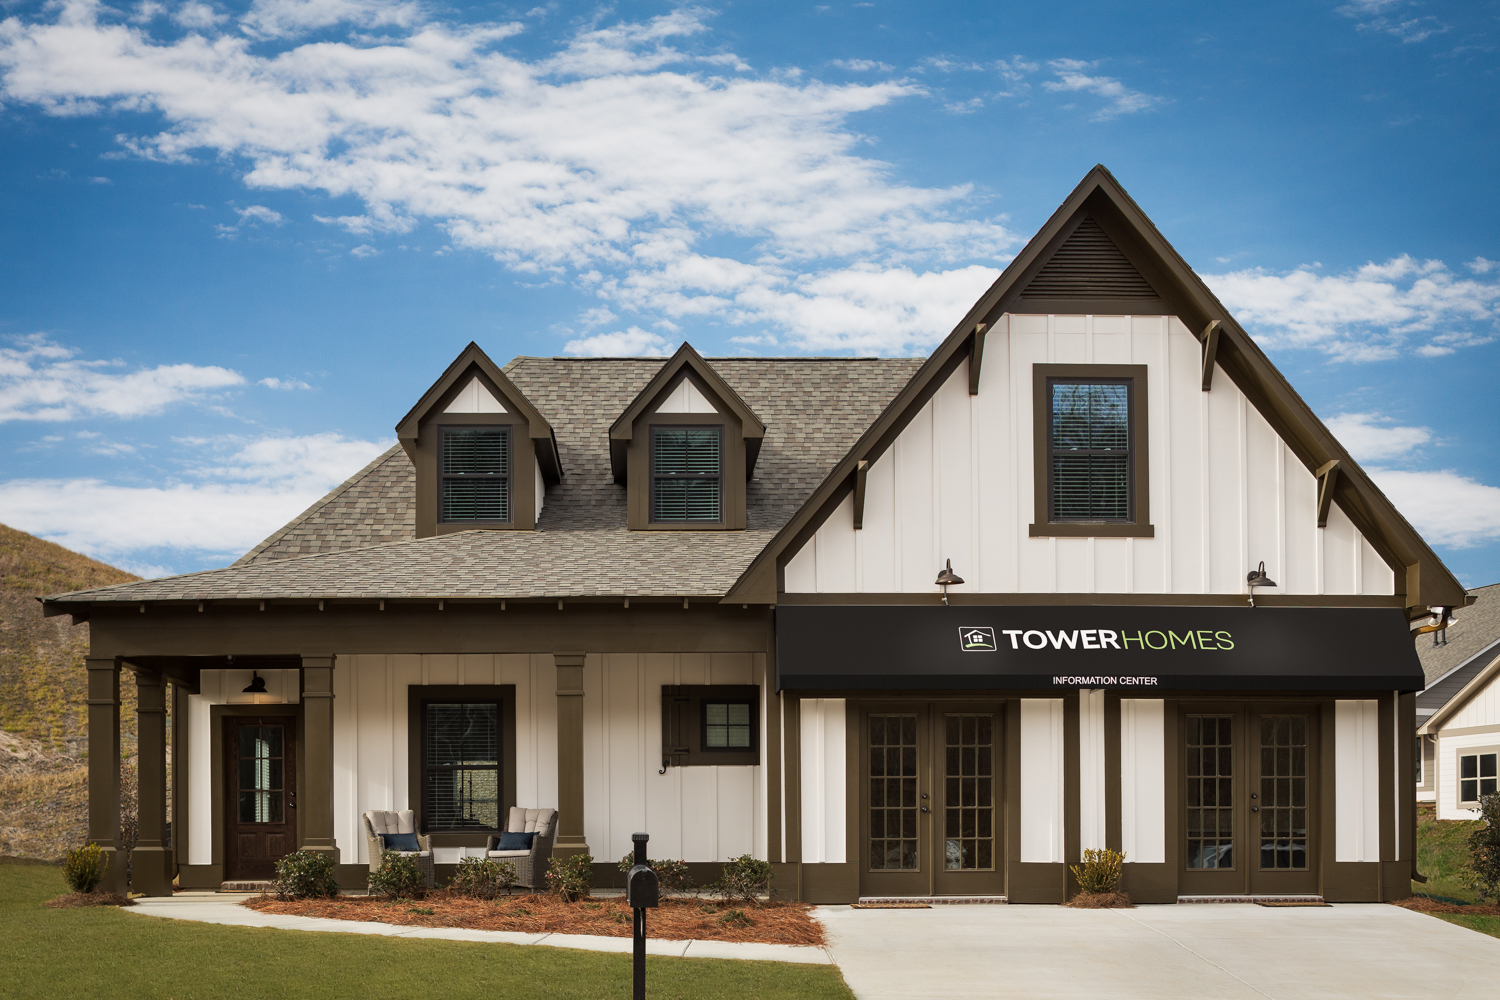 Beautiful new model home for Grants Mill Valley by Tower Homes of Birmingham AL